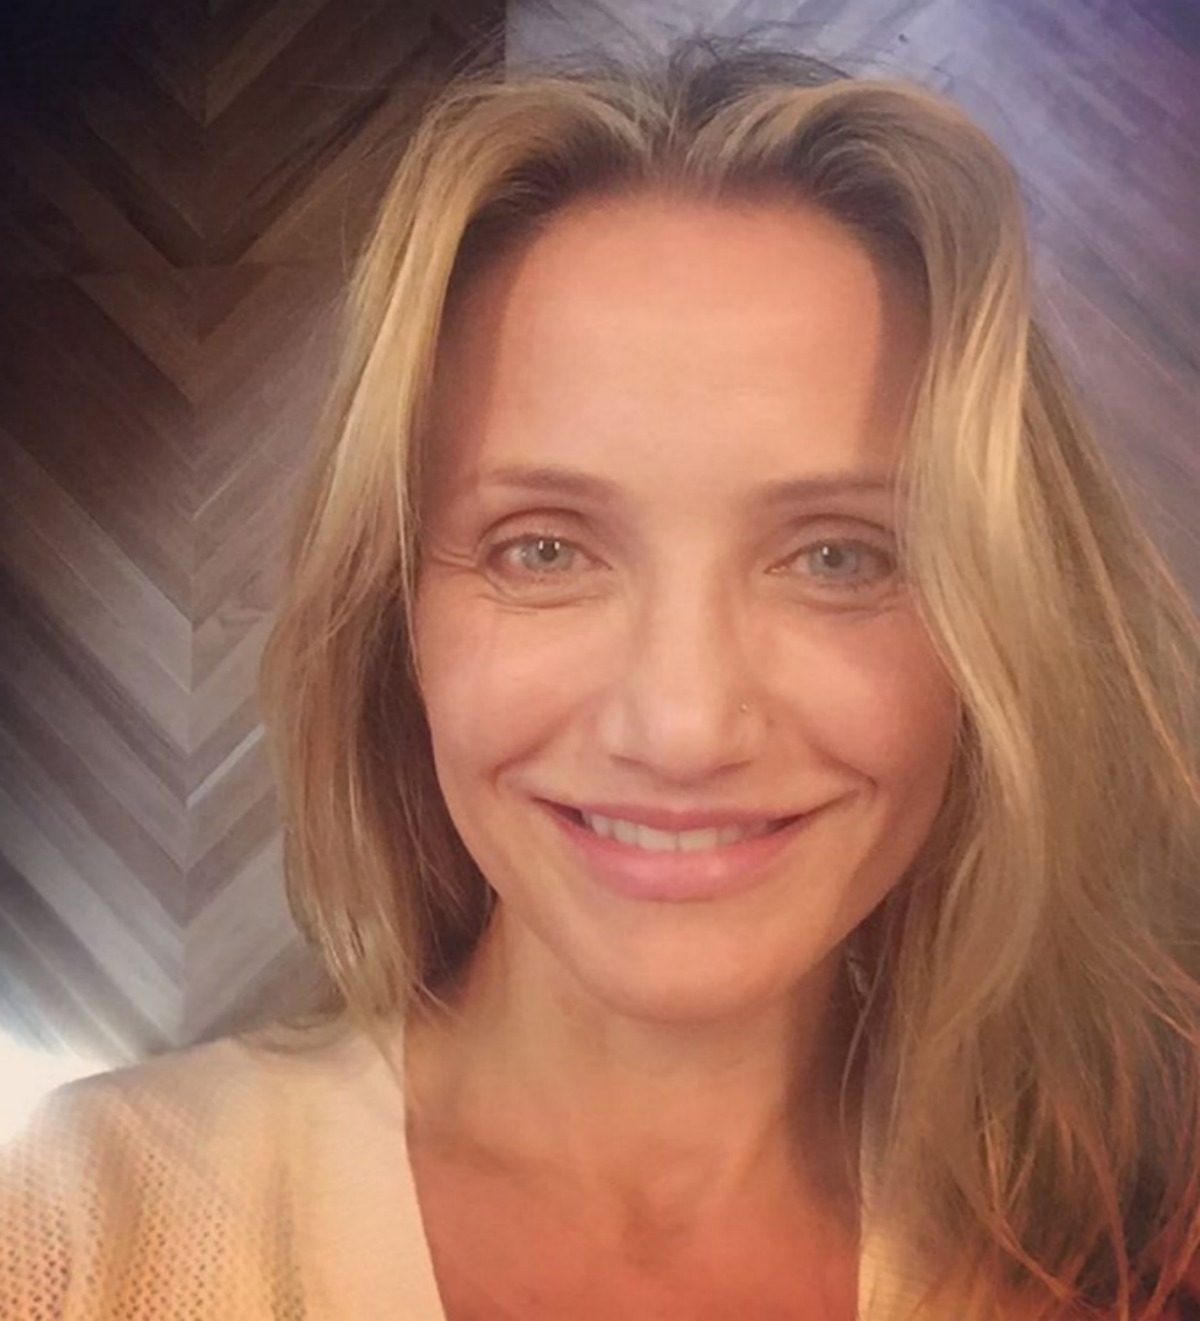 picture of Cameron Diaz without make up